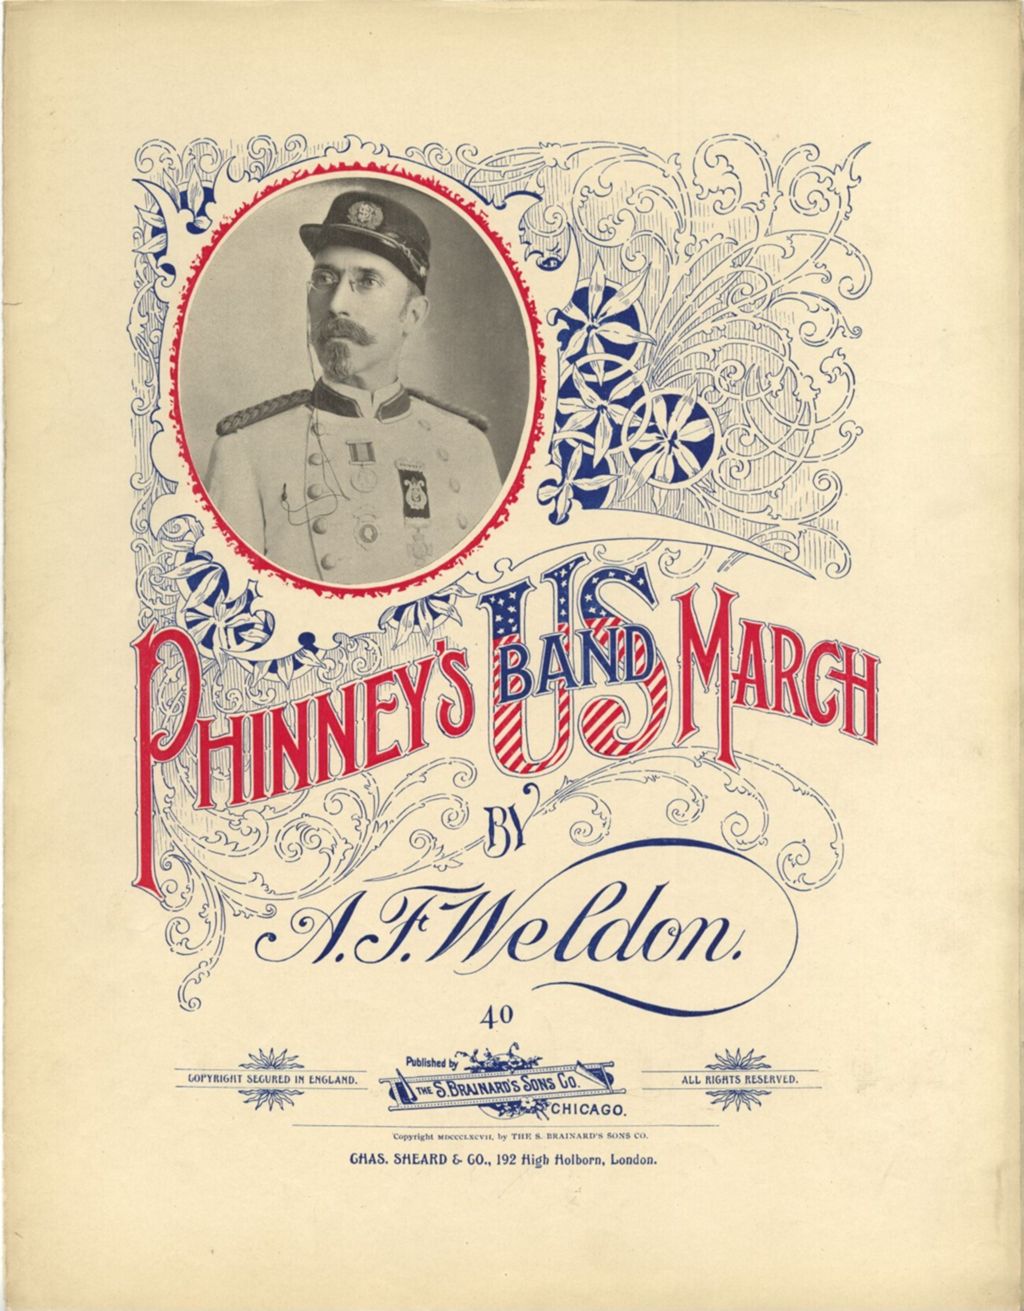 Miniature of Phinney's U.S. Band March